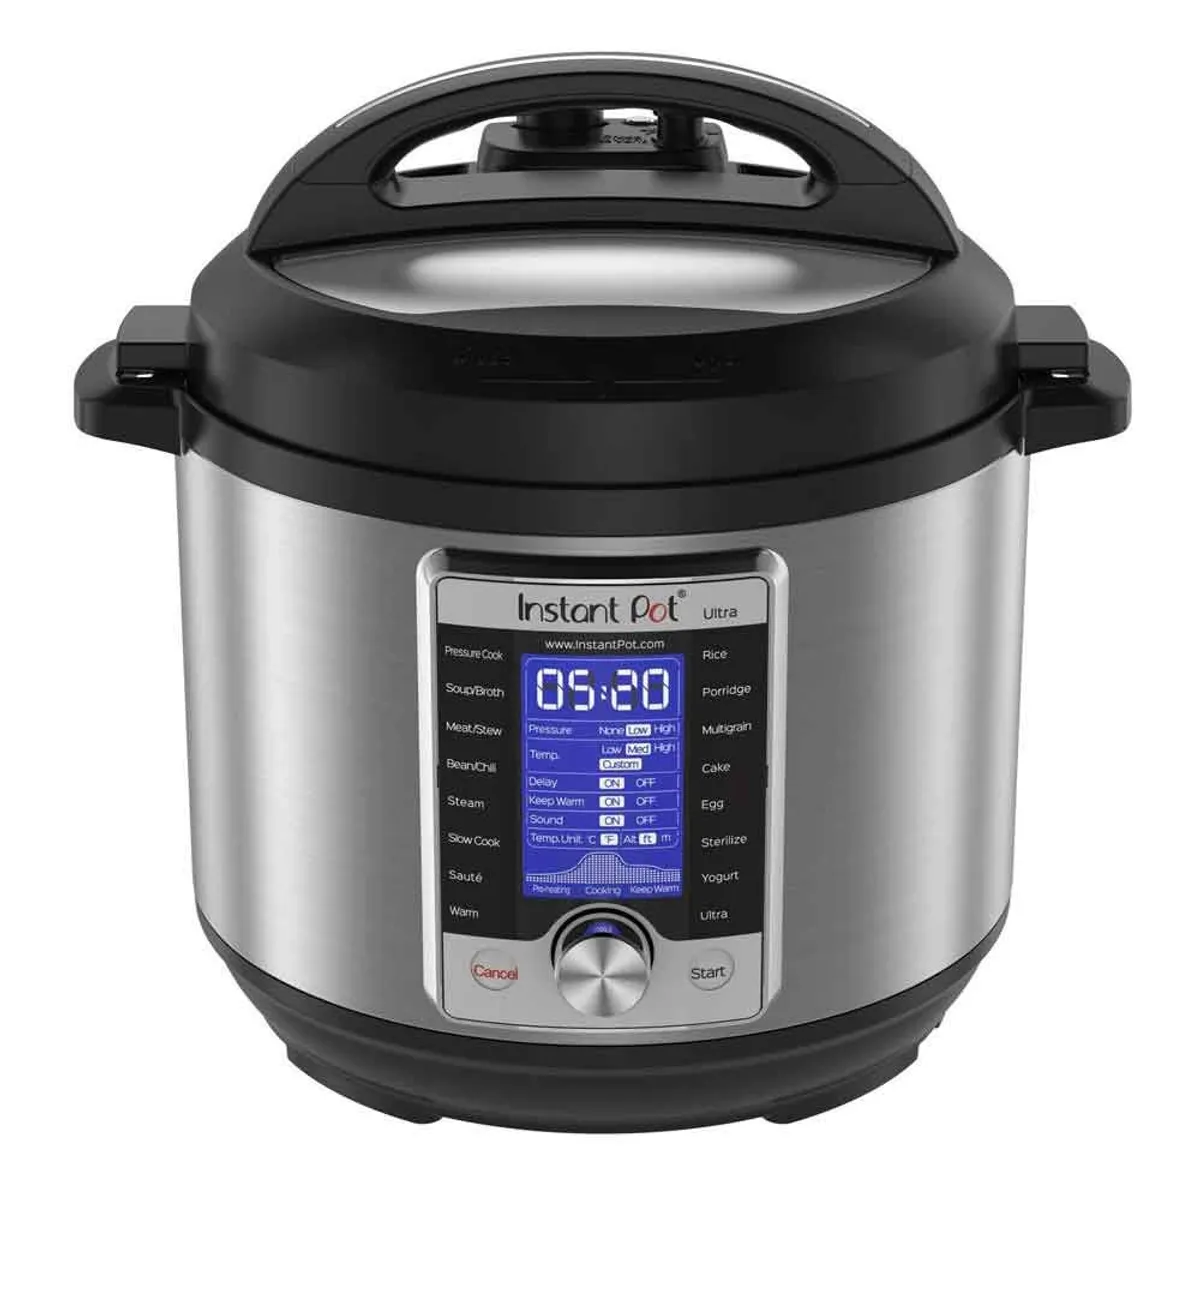 Instant Pot Ultra 6 Review